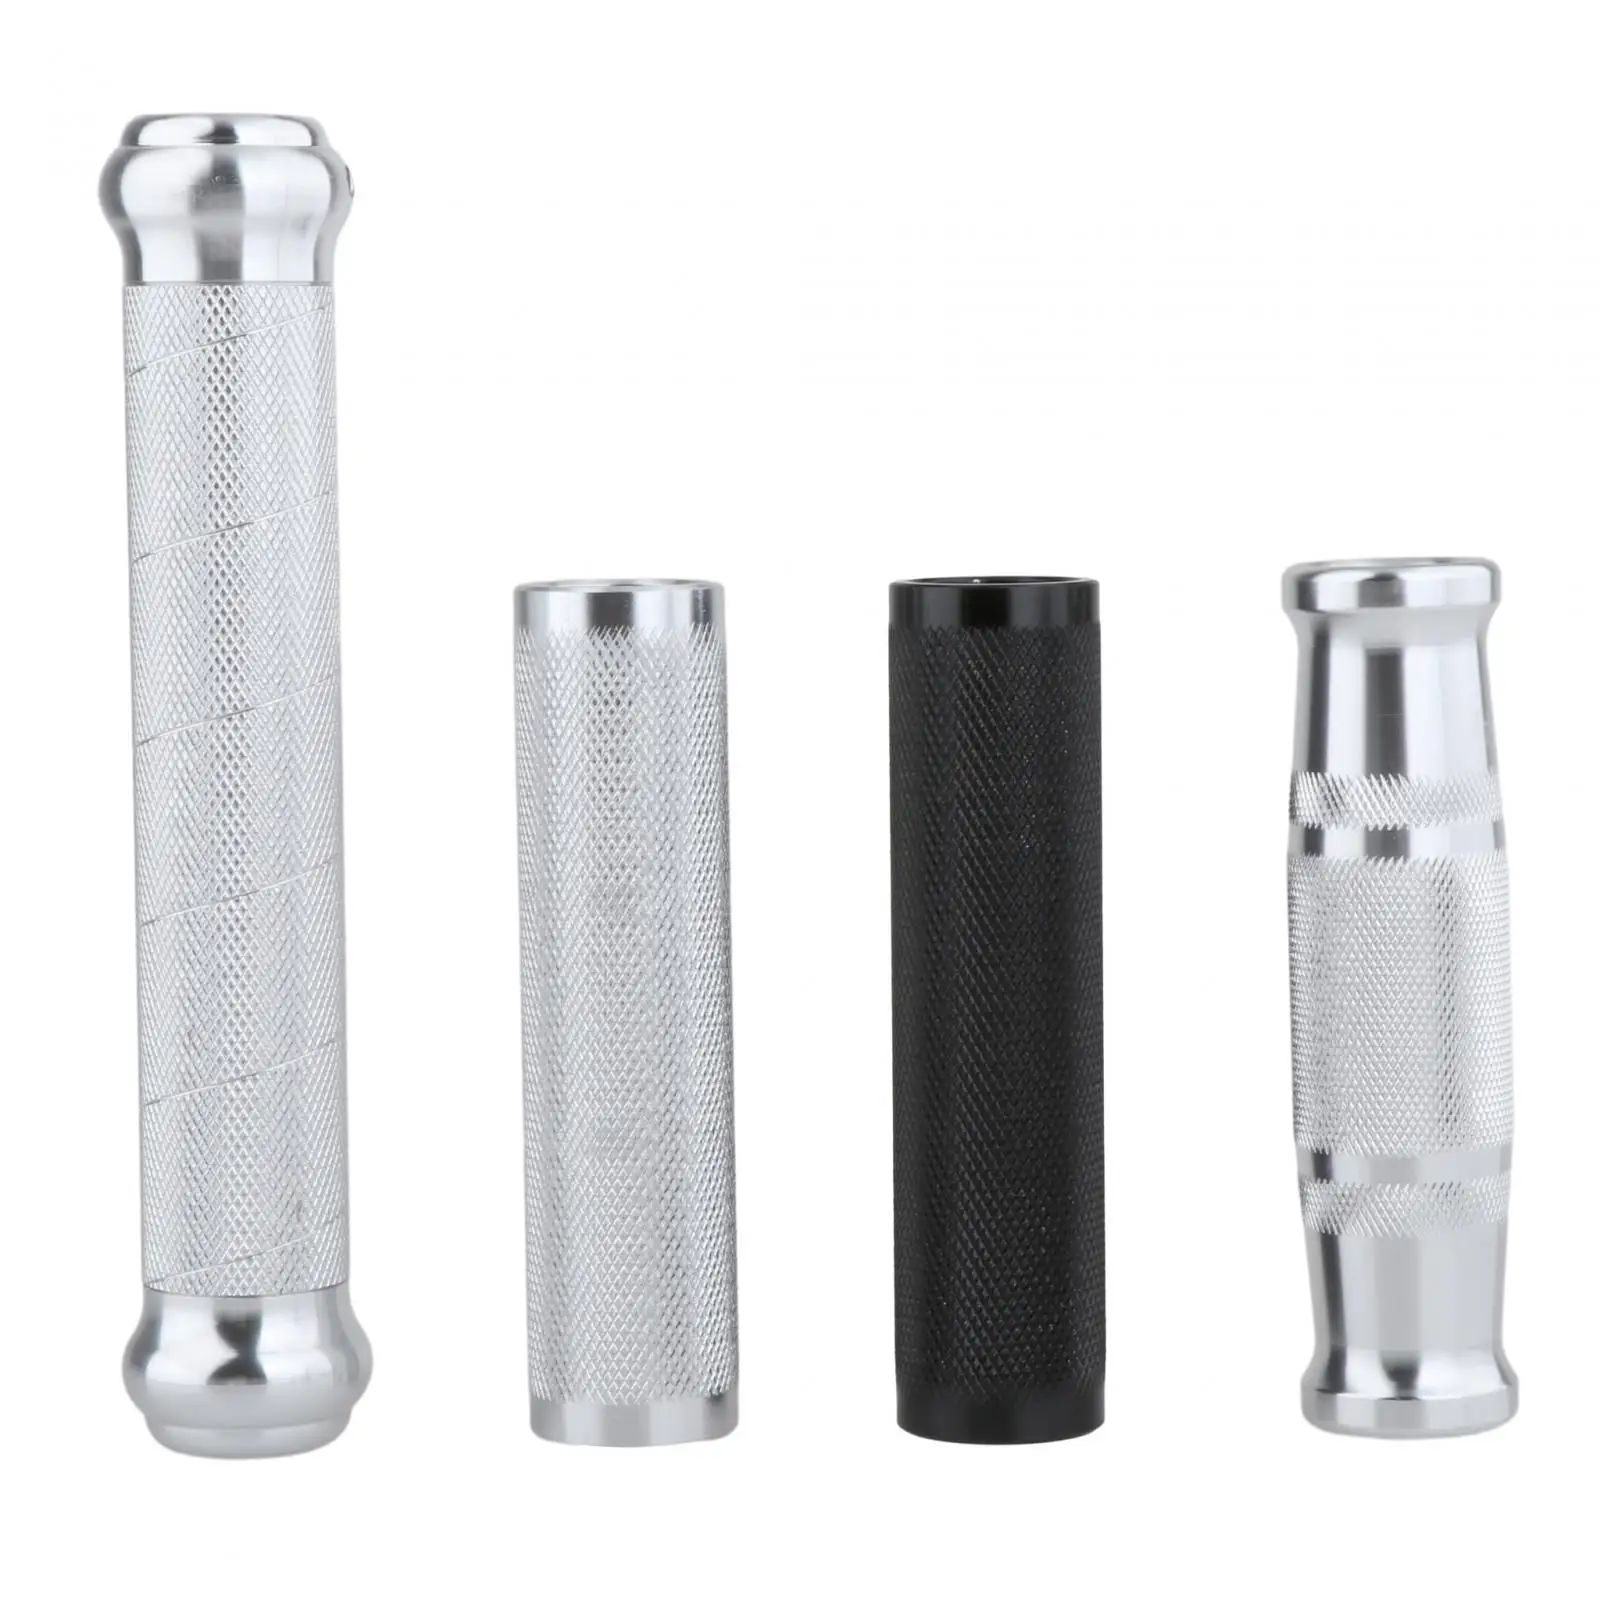 Aluminum Alloy Handle Easy to Install Durable Multifunctional Replacements for